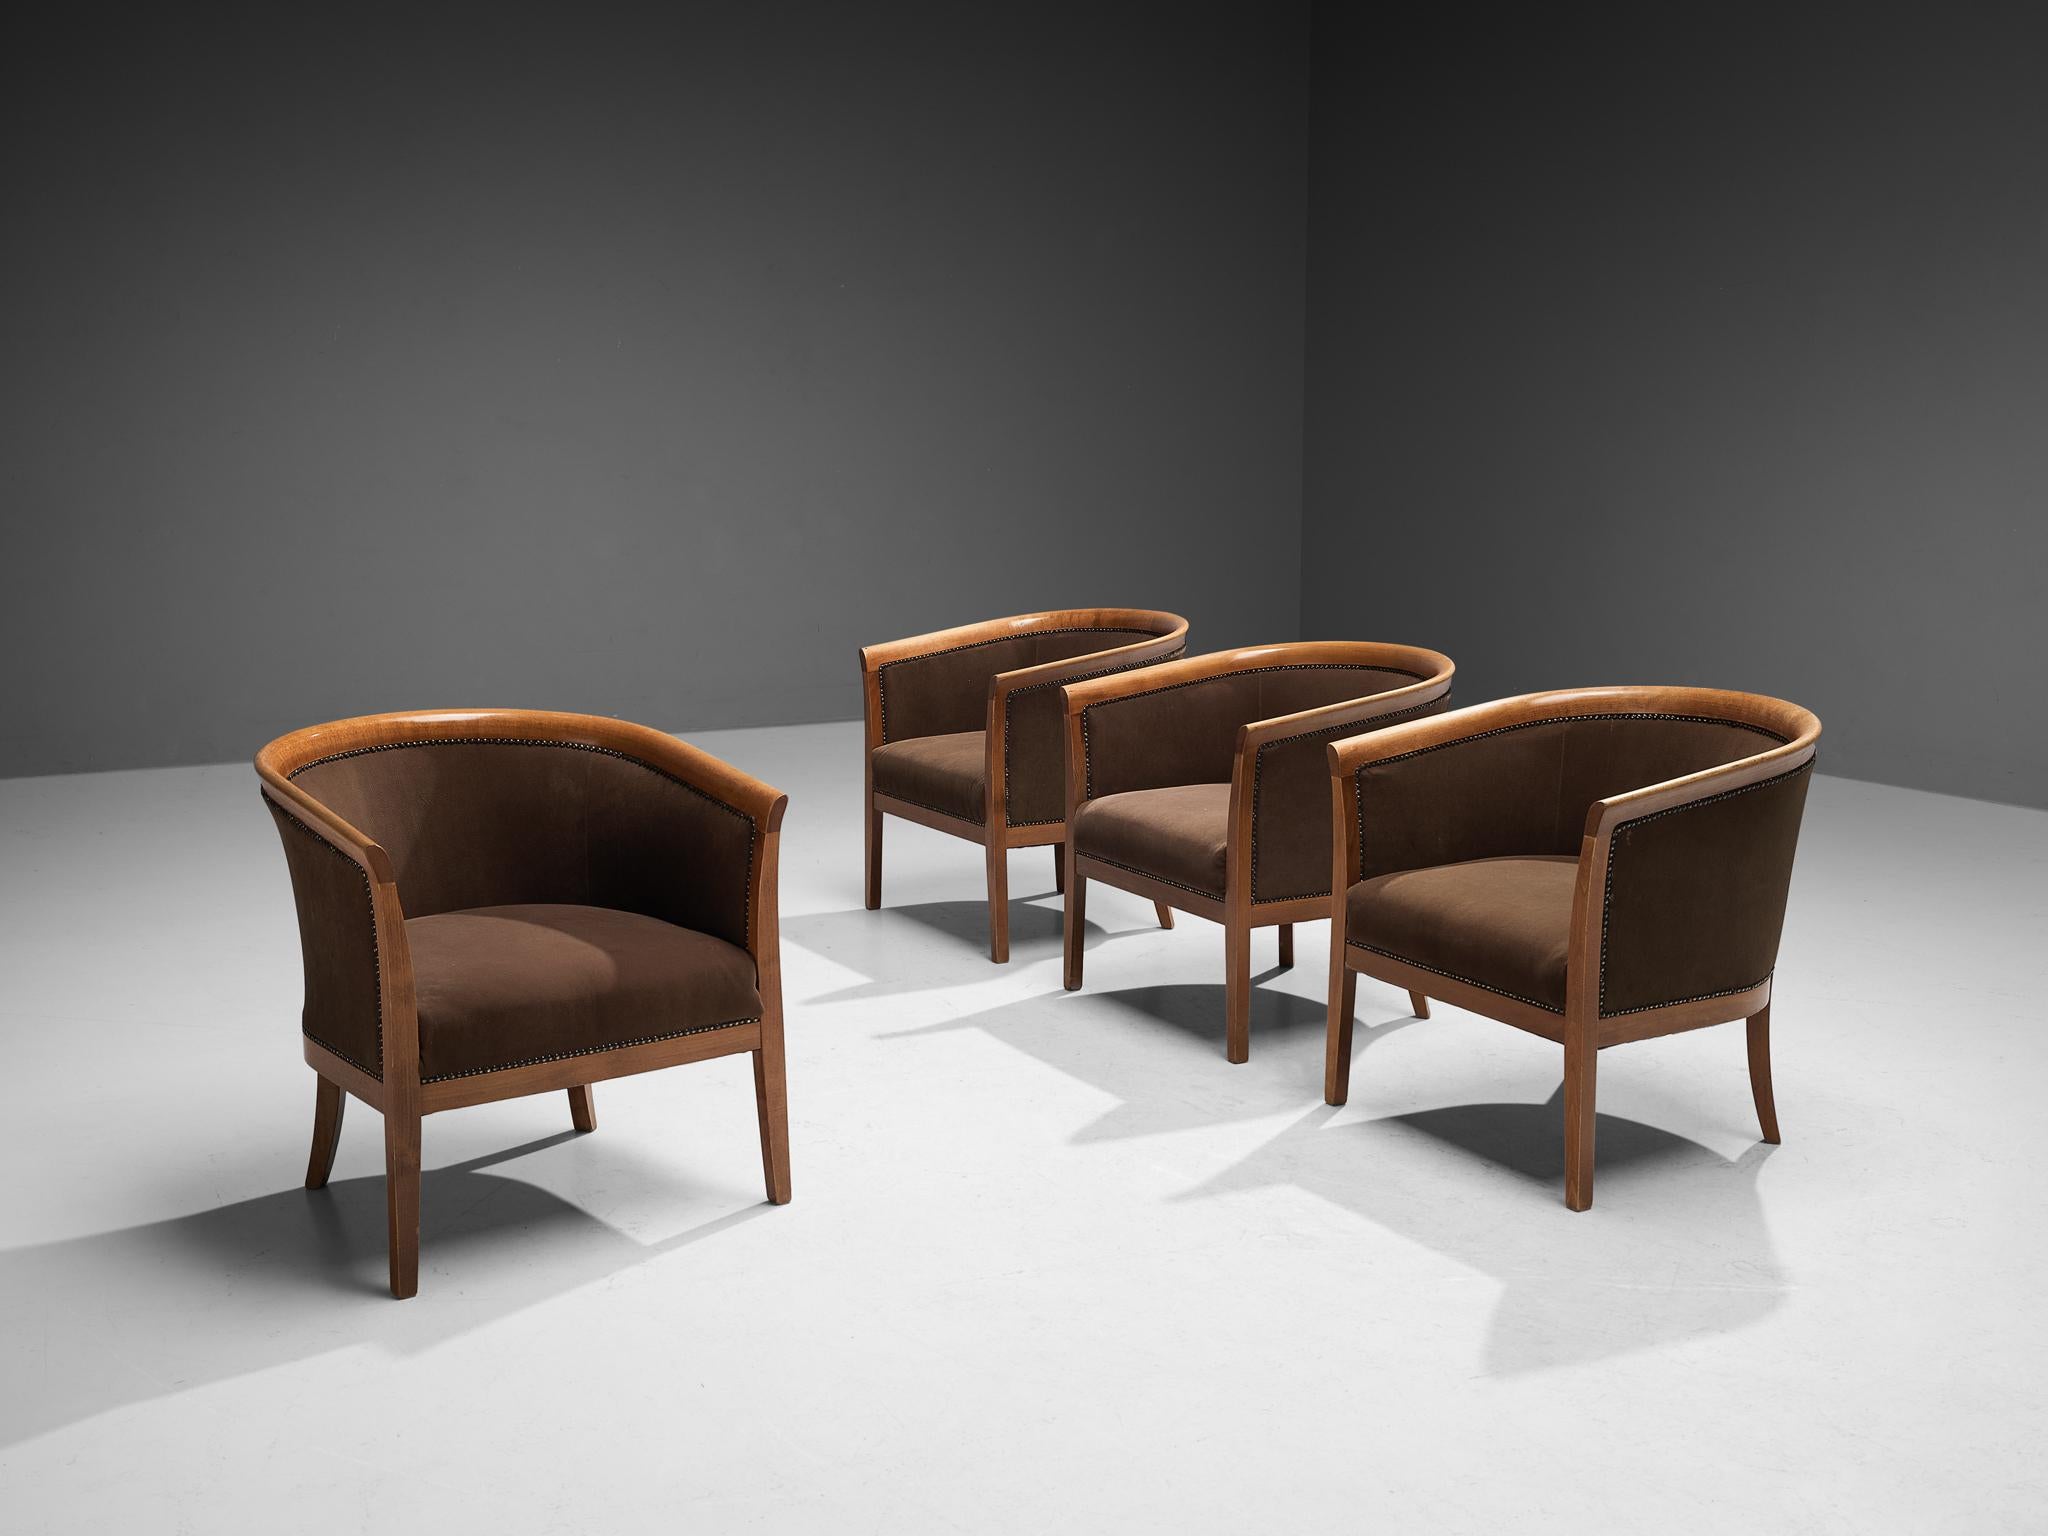 Club chairs, brown fabric, beech, brass, France, 1940s.

These classically sculpted armchairs feature seatings that are designed as a shell, which embraces the sitter wonderfully. The curvaceous lines of the frame are further emphasized by the brass